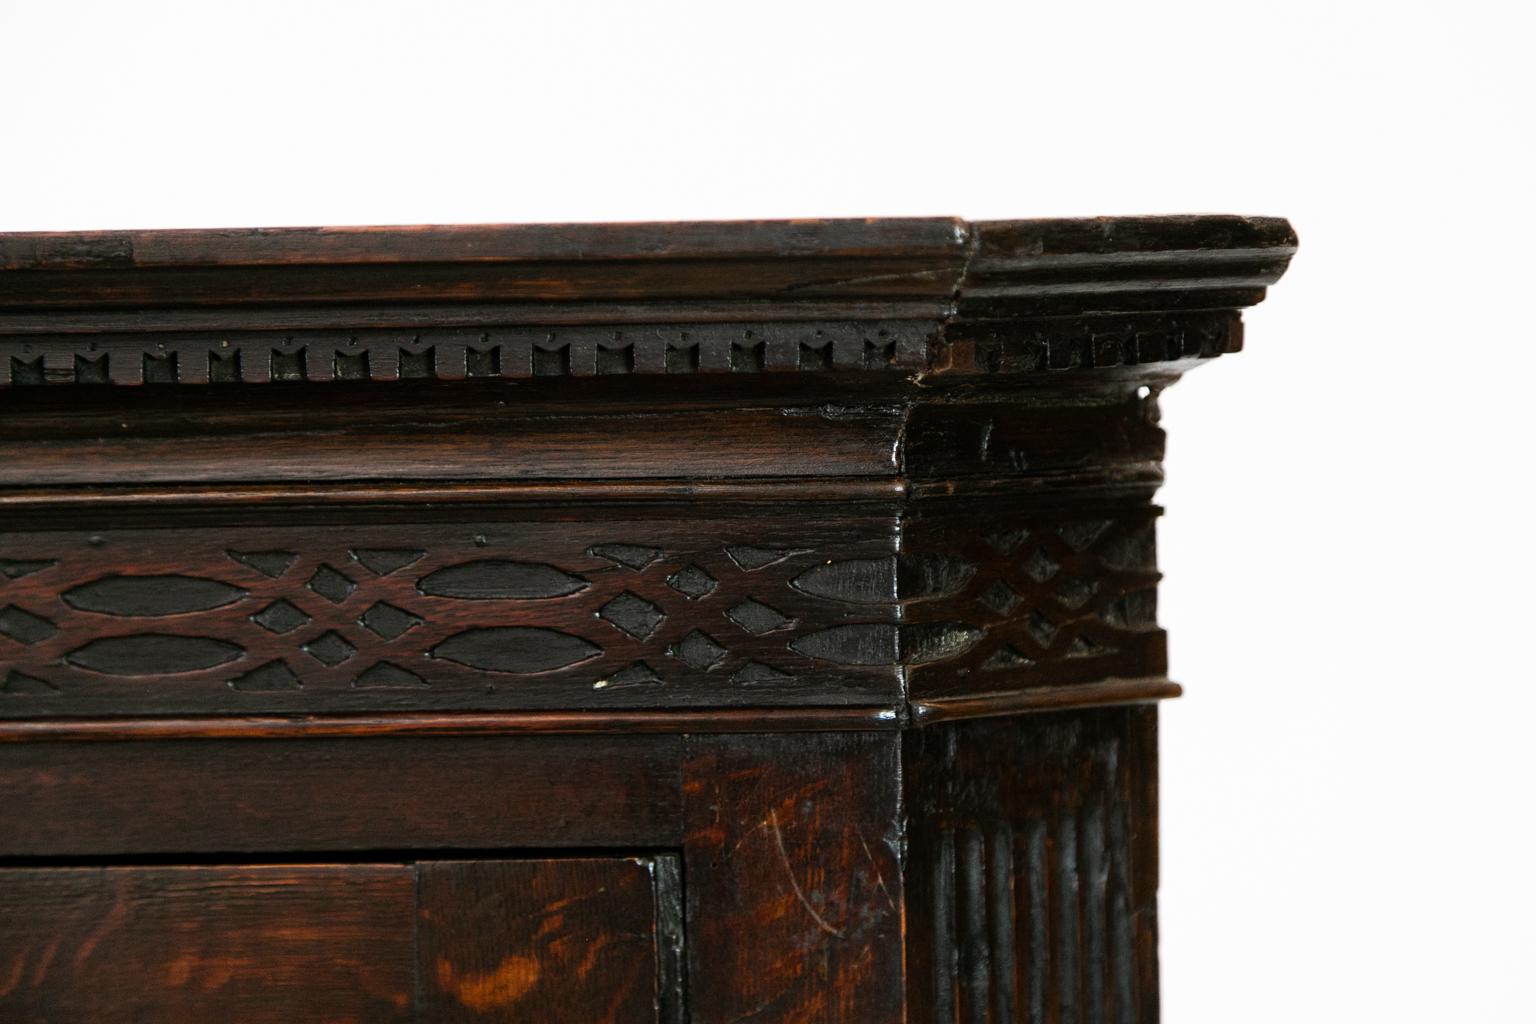 This hanging English oak corner cupboard has the original brass open fretwork escutcheon. The door has applied molding forming a center panel. The crown molding has carved dentil work and the base has shaped applied molding. The front exposes